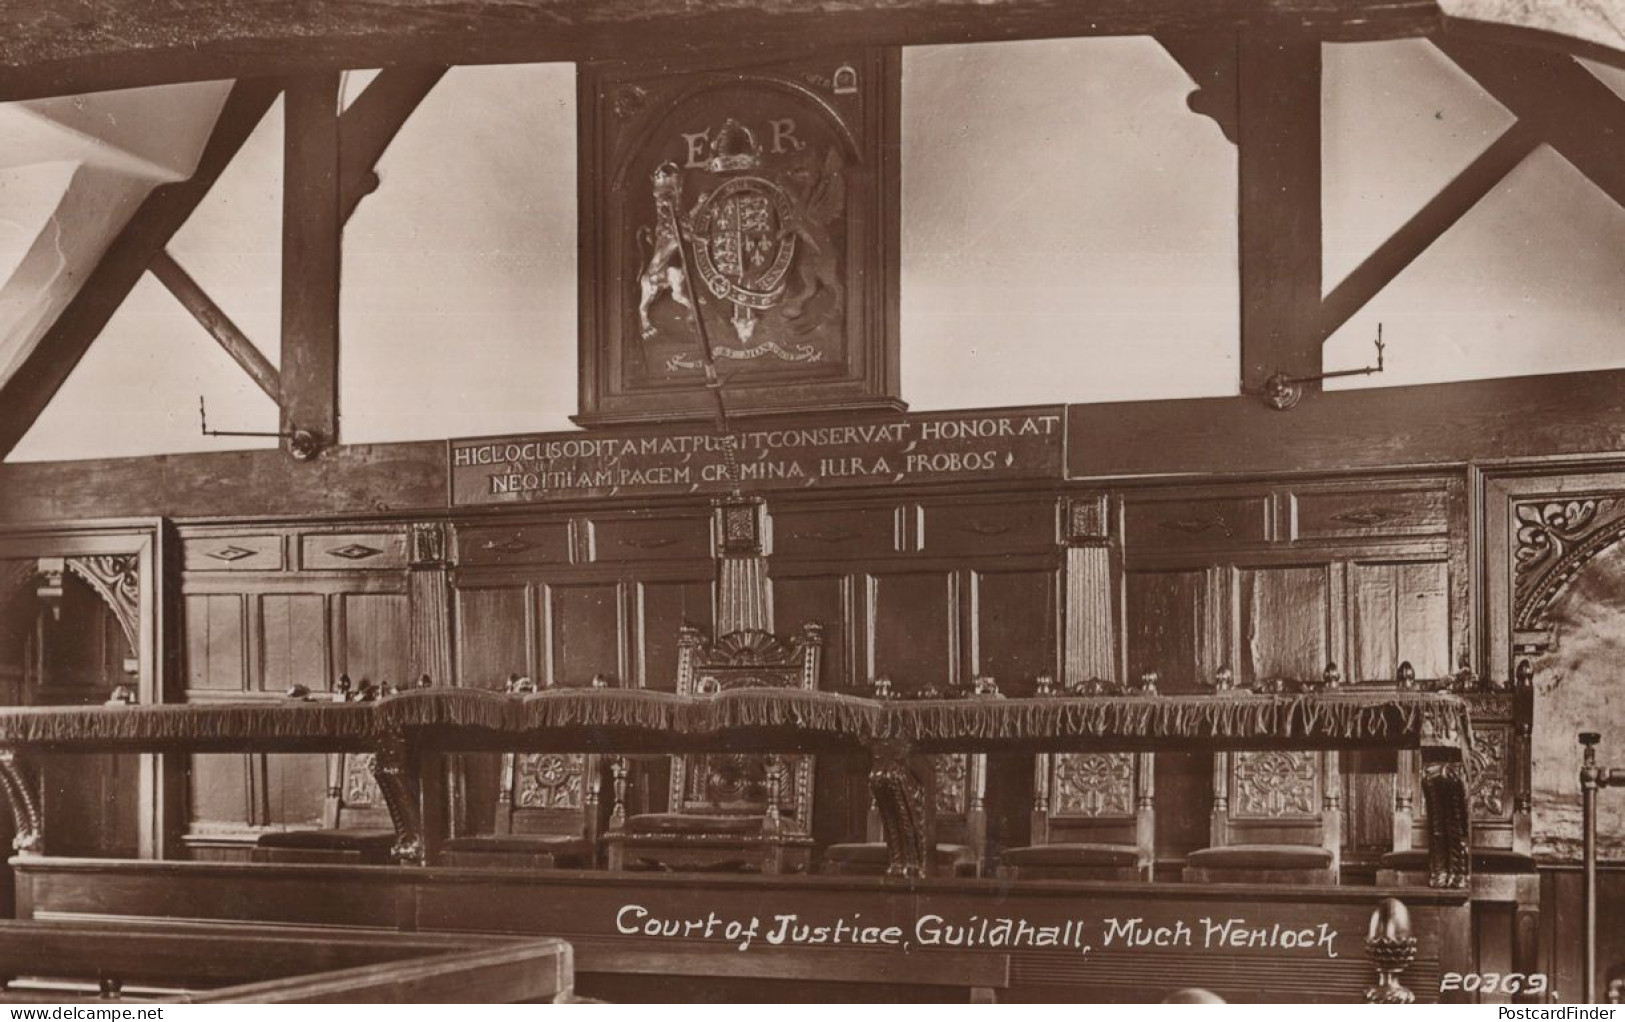 Court Of Justice Guildhall Much Wenlock Shropshire Old RPC Postcard - Shropshire